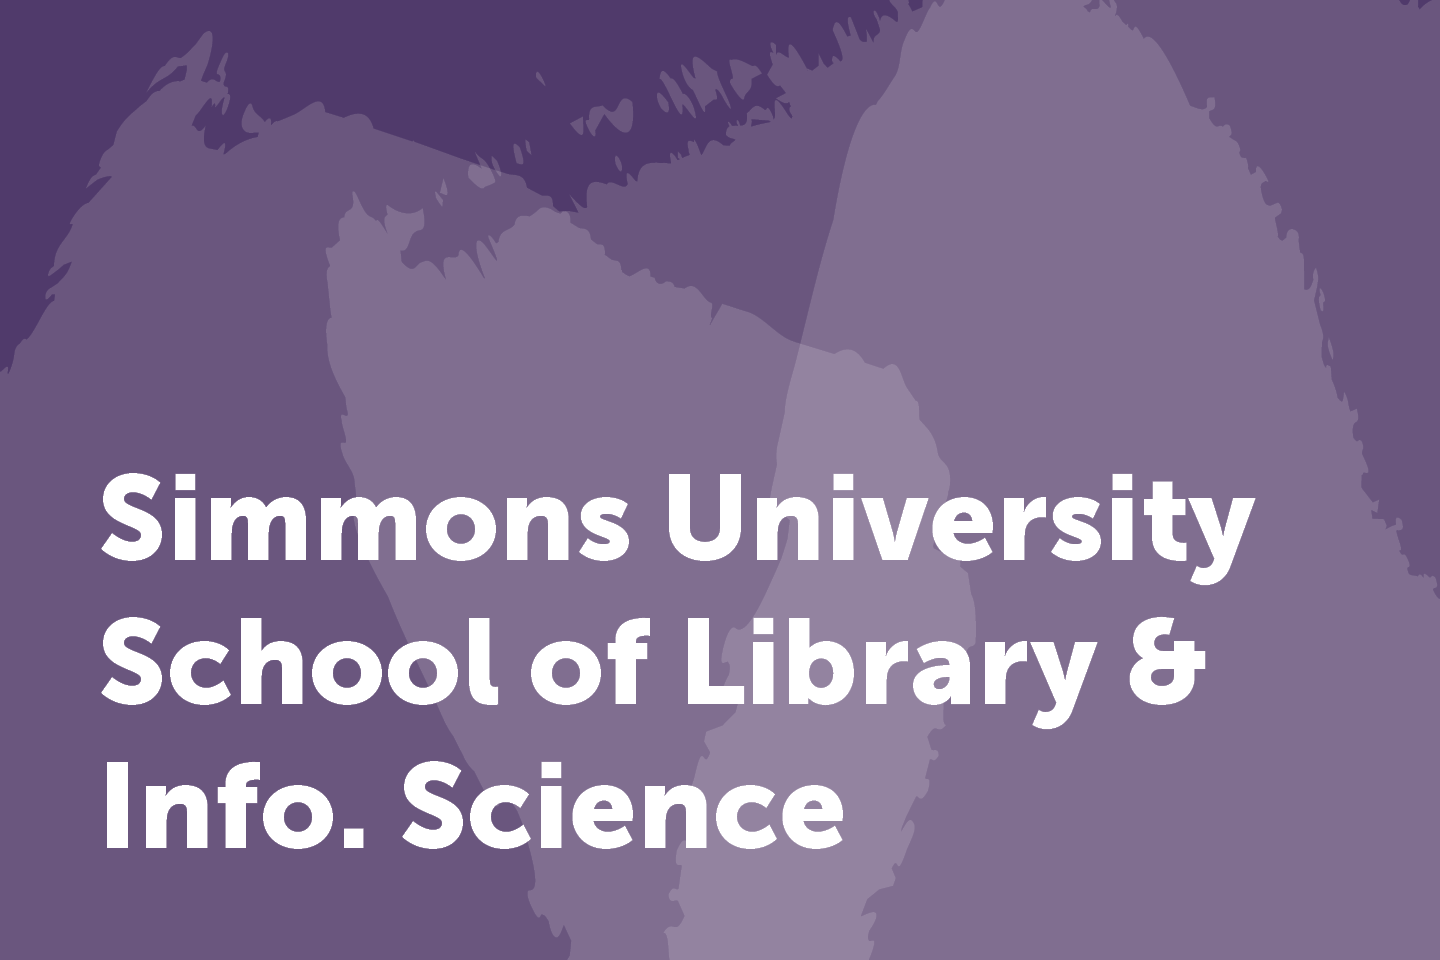 Simmons University School of Library and Information Science